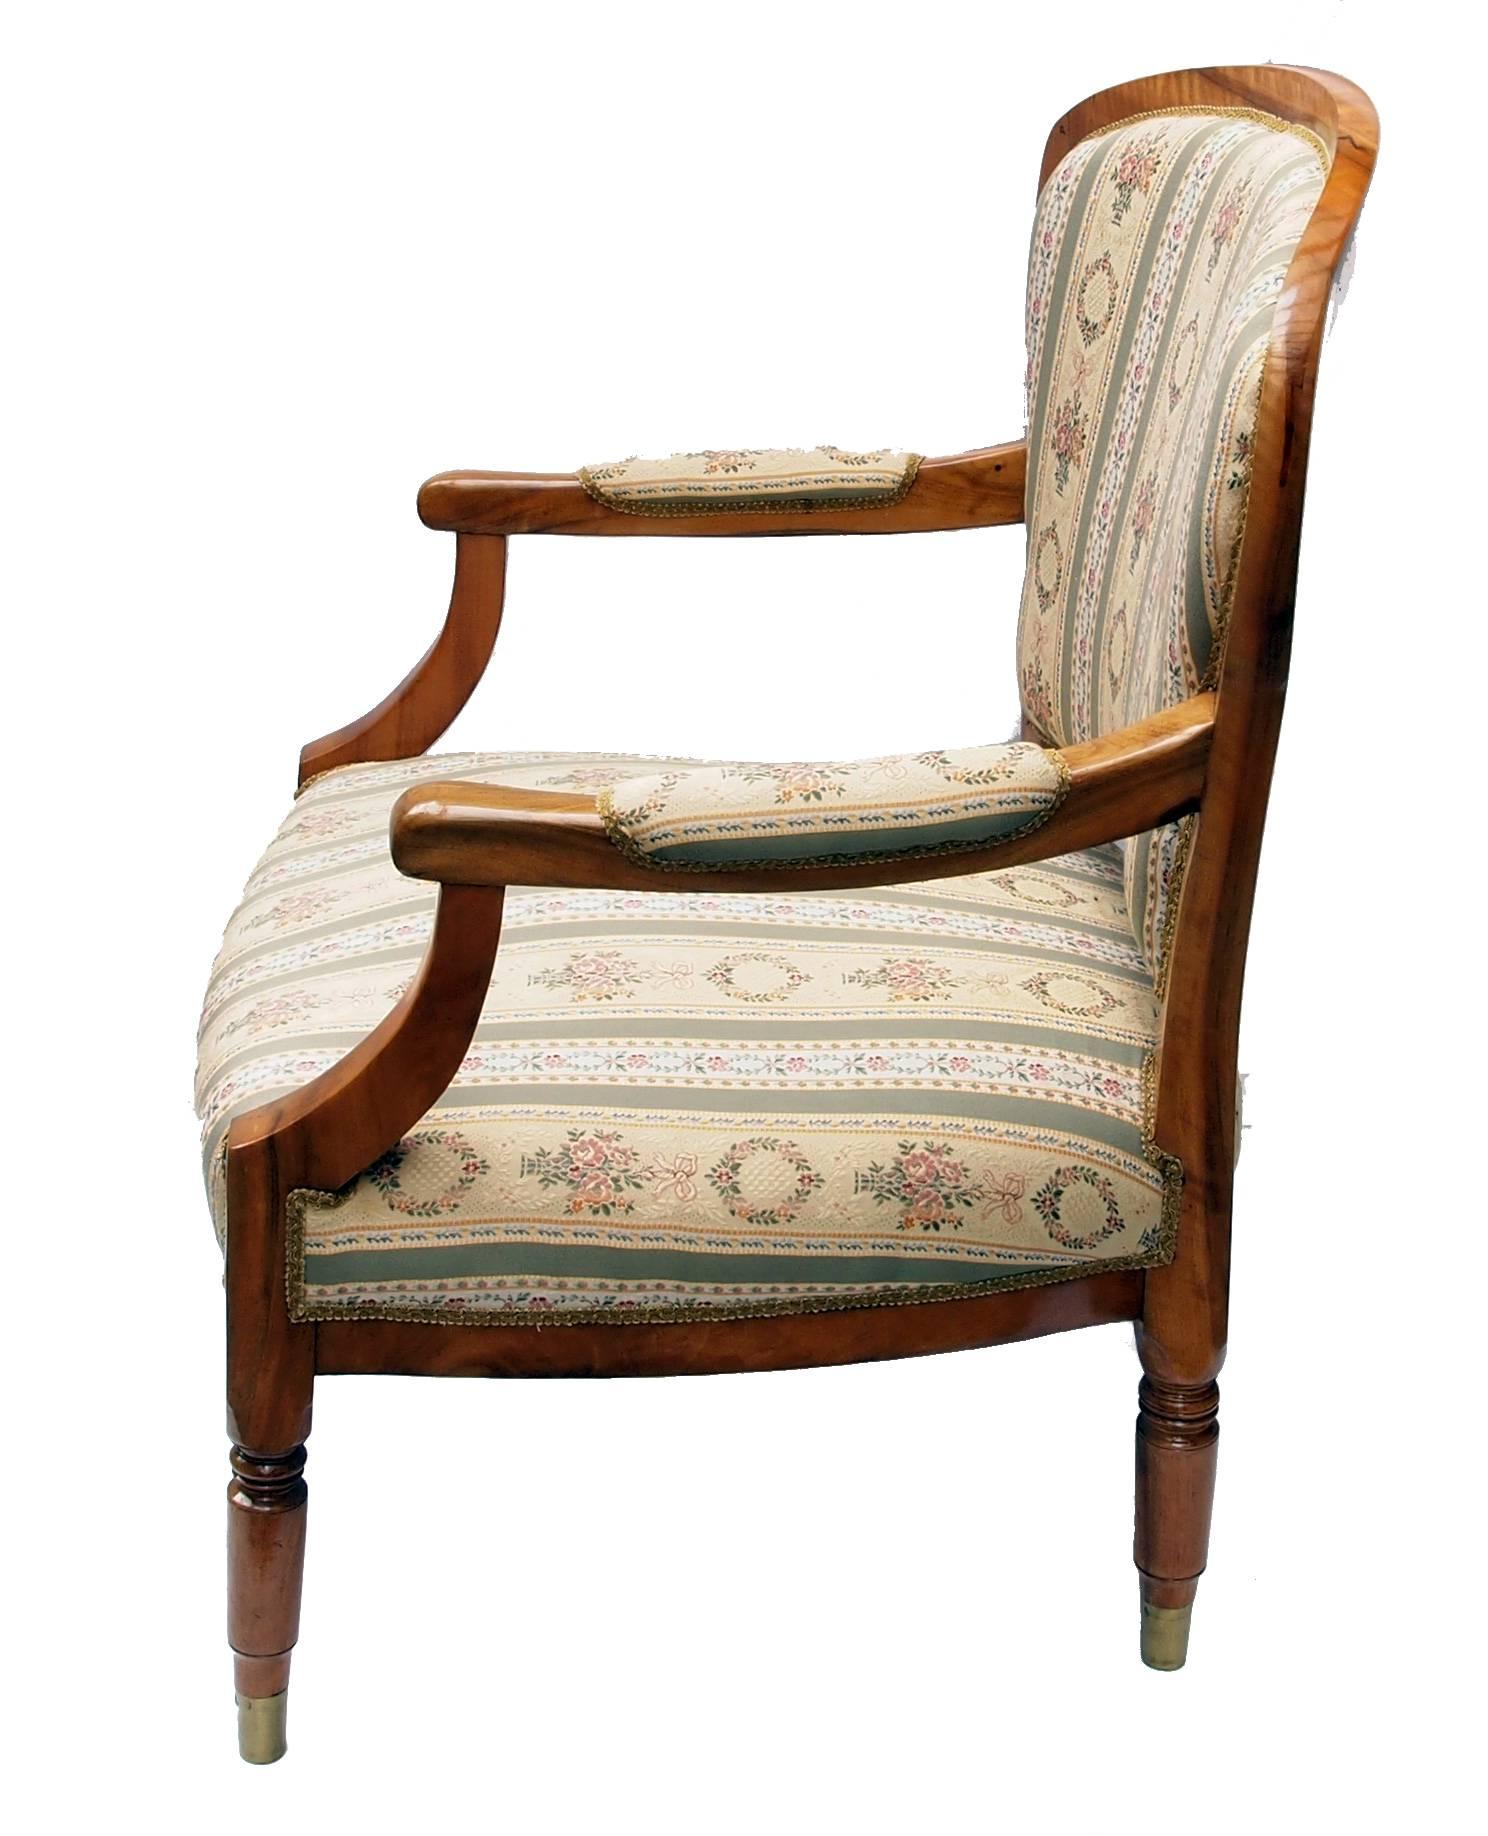 Biedermeier armchair from Germany, very good restorated condition, solid walnut. The feet are with brass shoes.